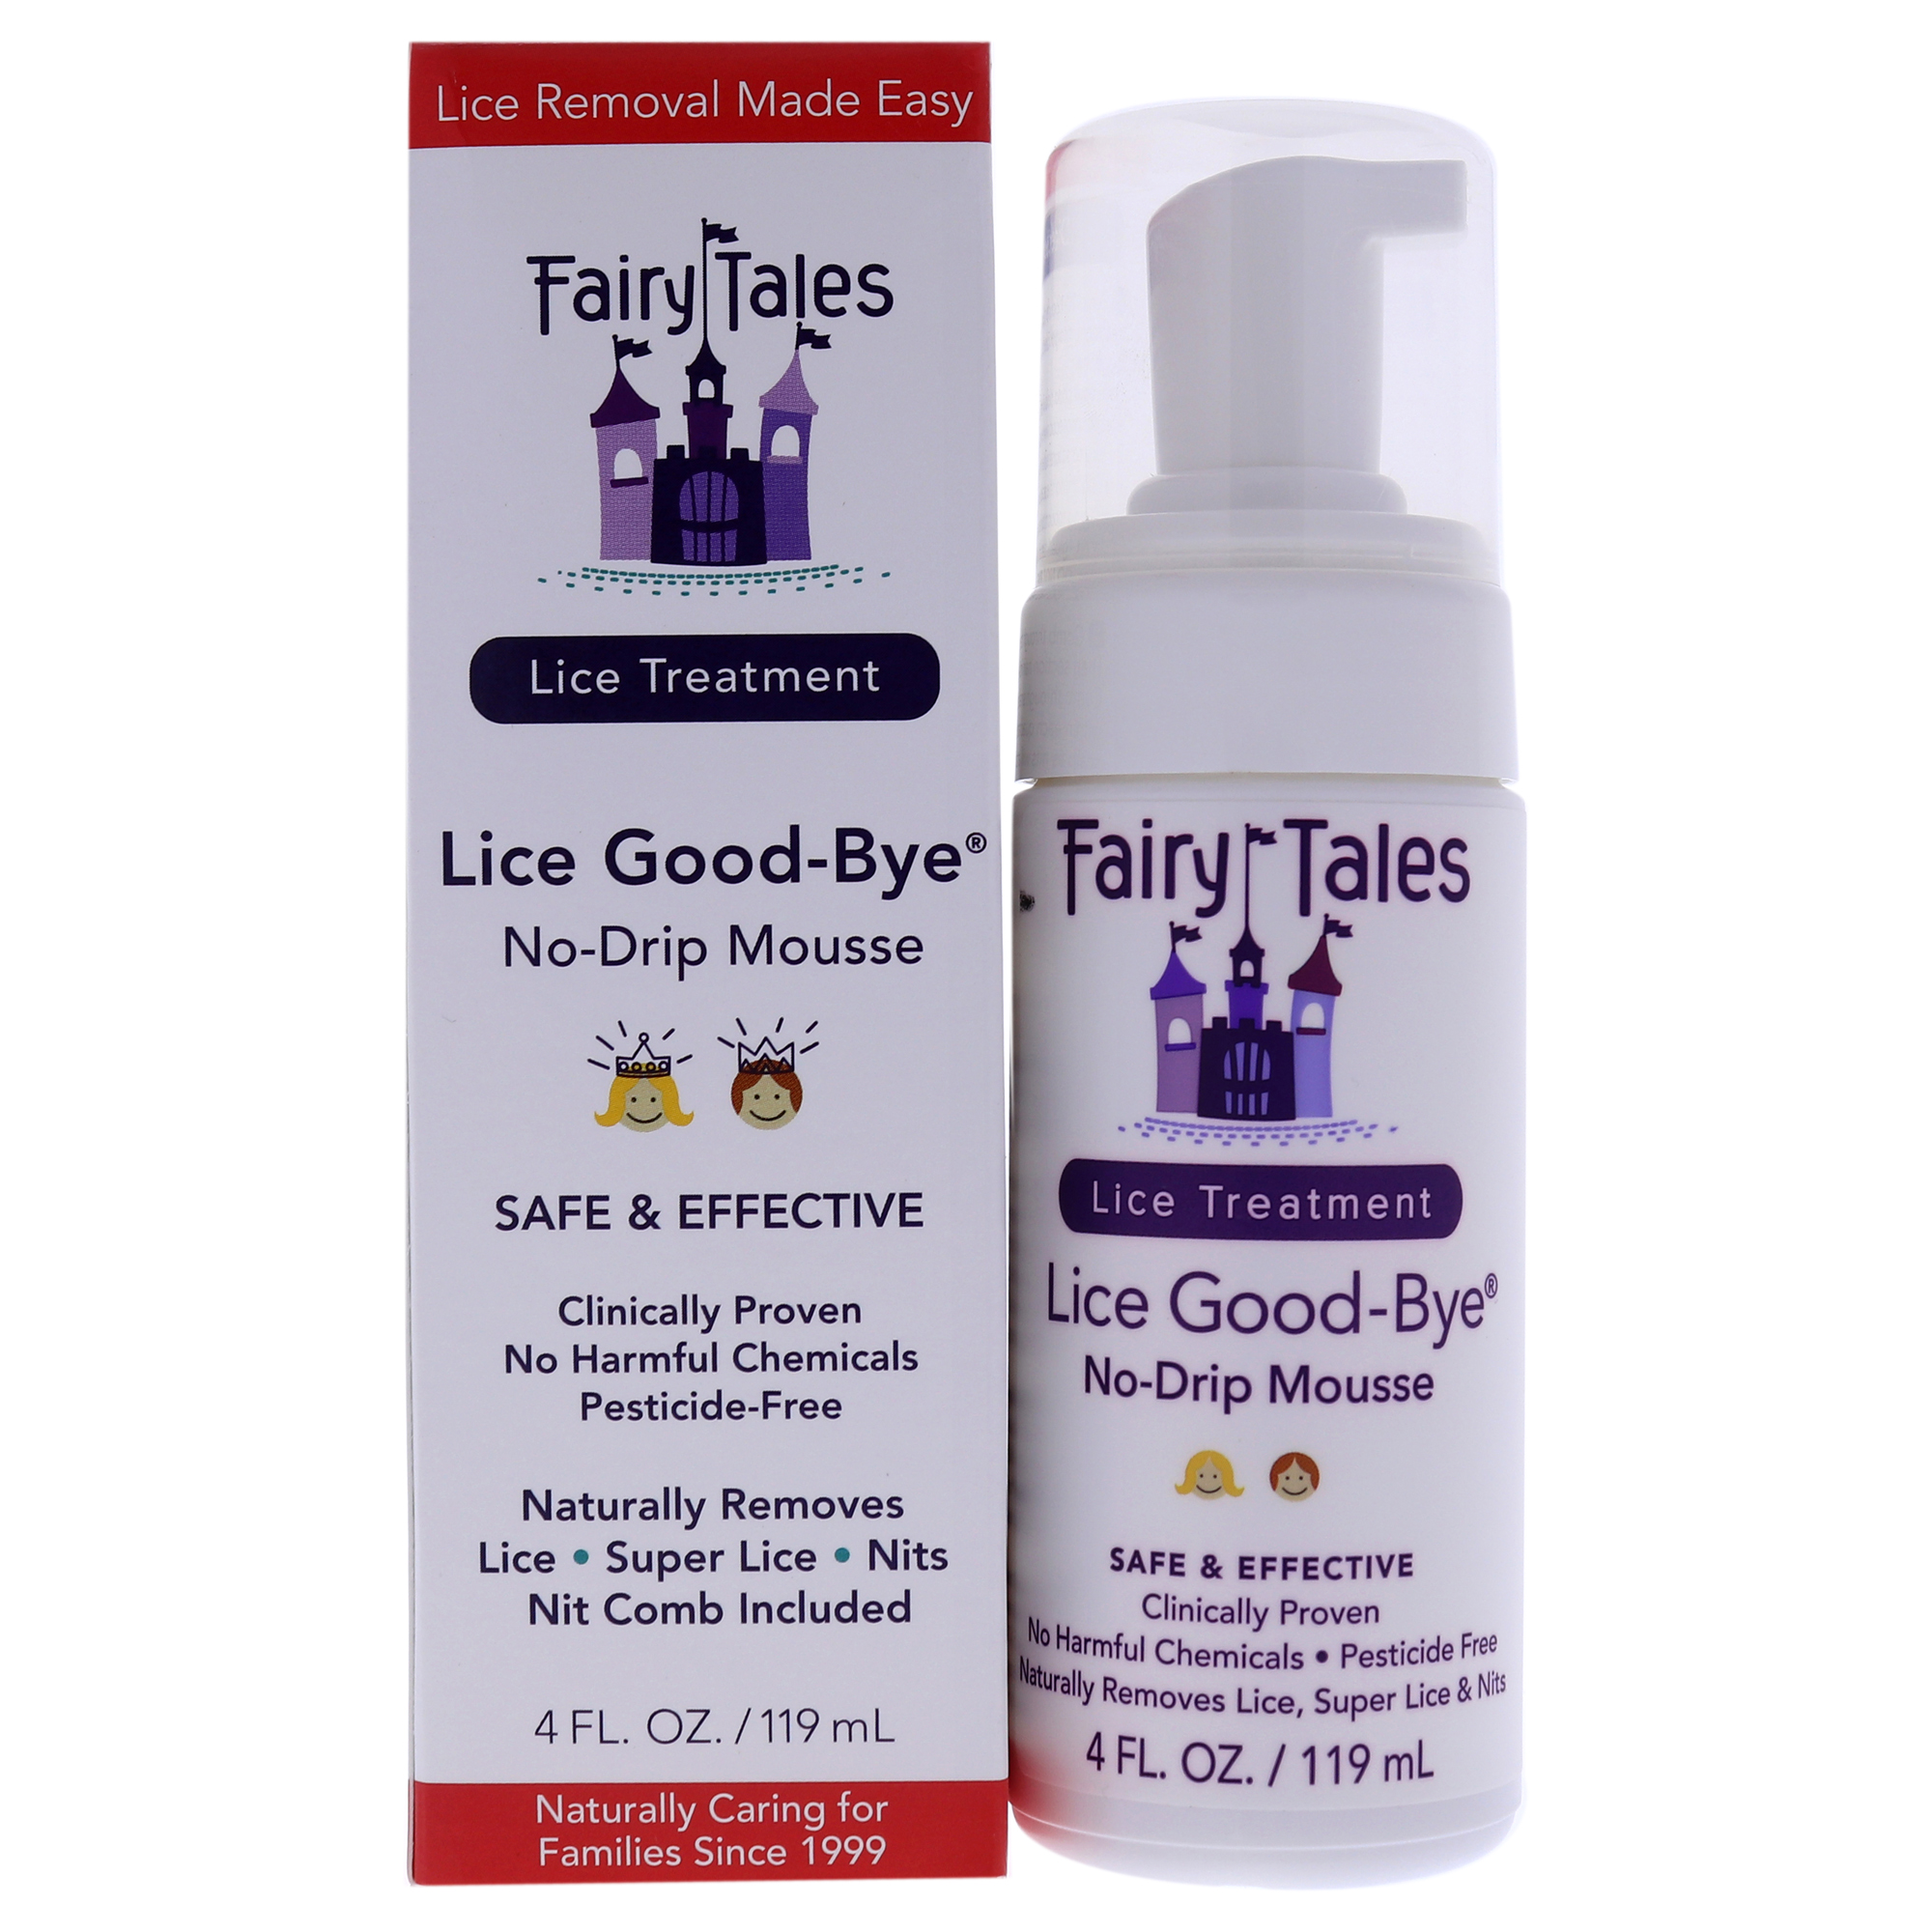 Lice Good-Bye Treatment by Fairy Tales for Kids - 4 oz Treatment with Comb